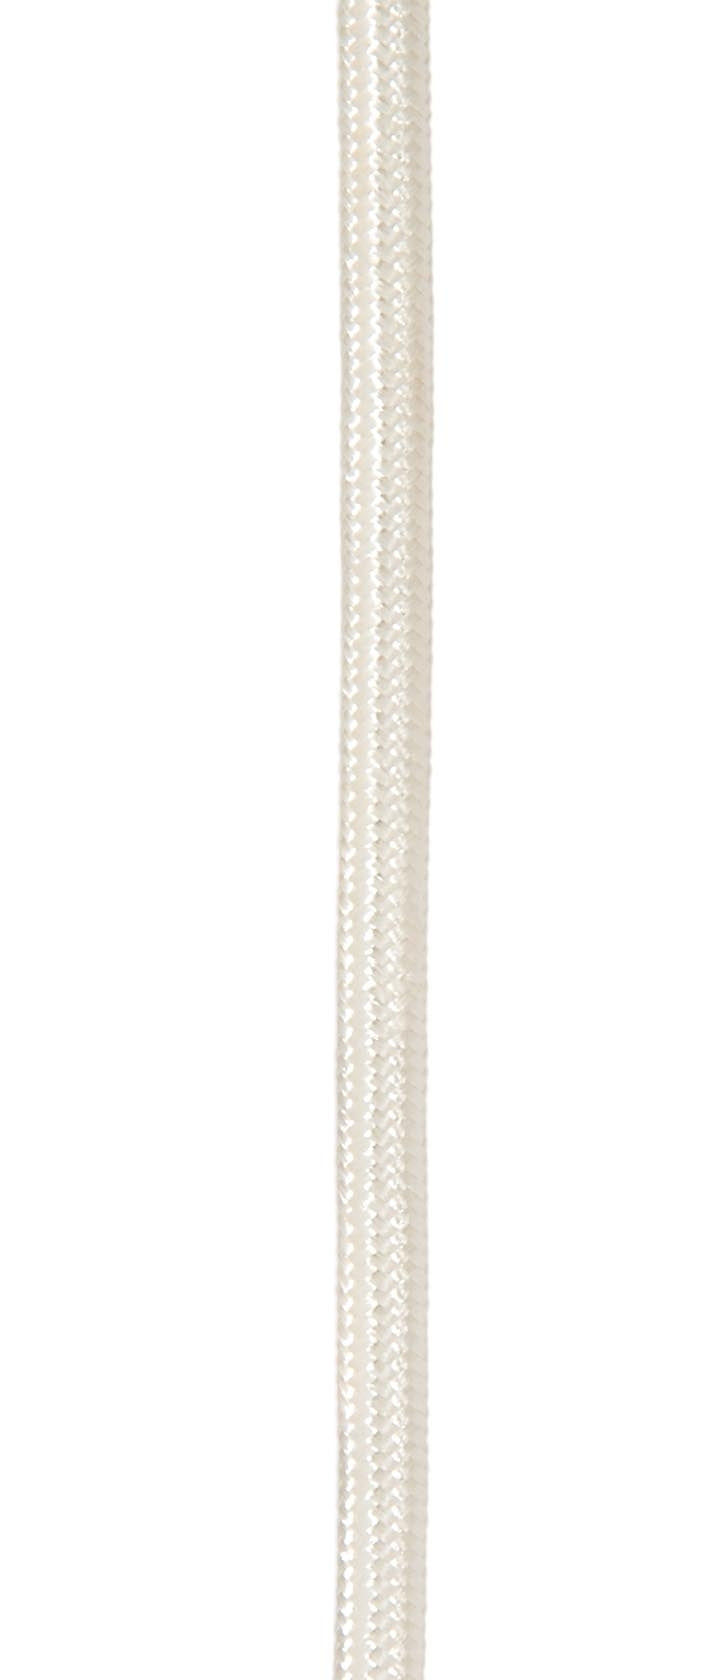 18/3 SVT-B Ivory Color, Fabric Covered Parallel Fabric Lamp Cord - Choice of Length, UL Listed